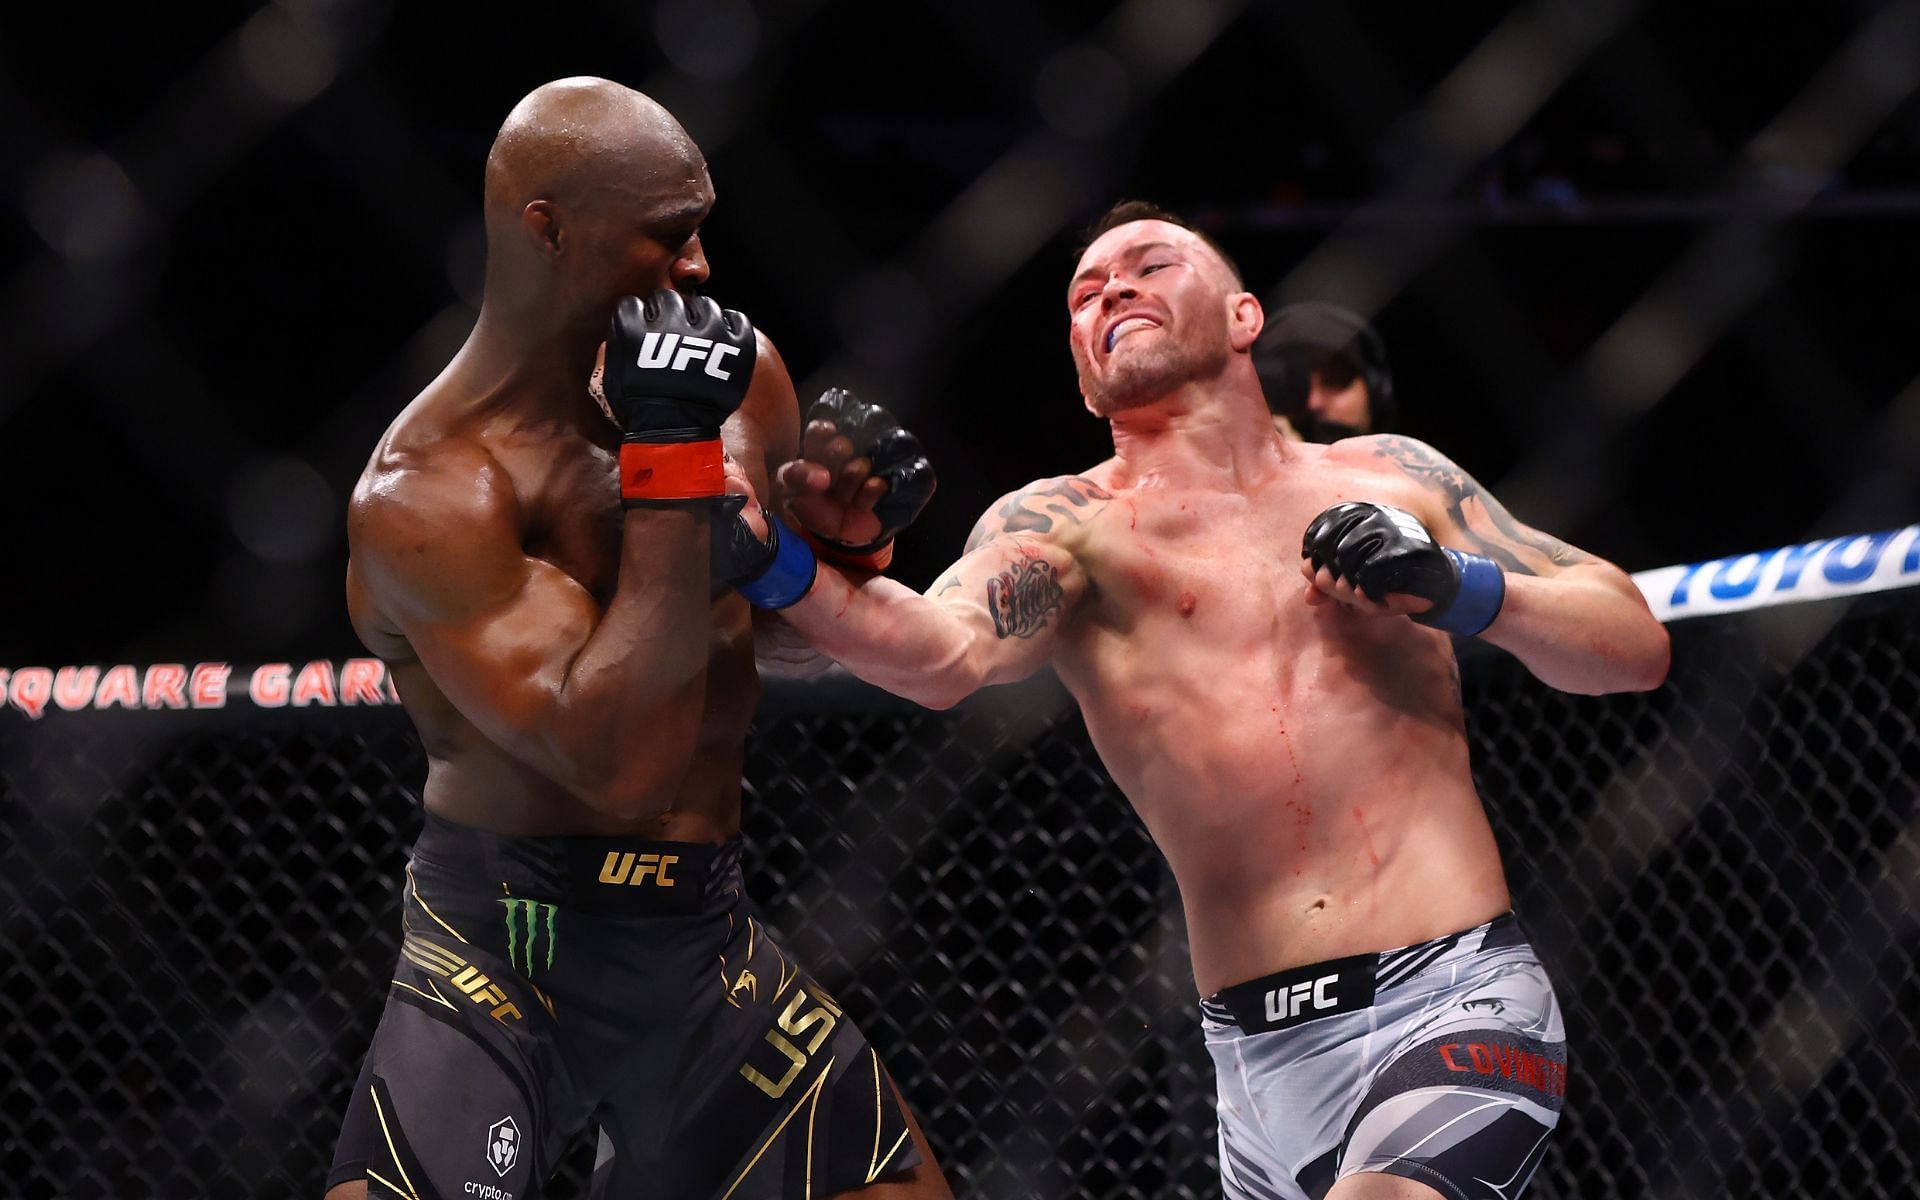 Kamaru Usman (left) in action against Colby Covington (right) at UFC 268 in New York City